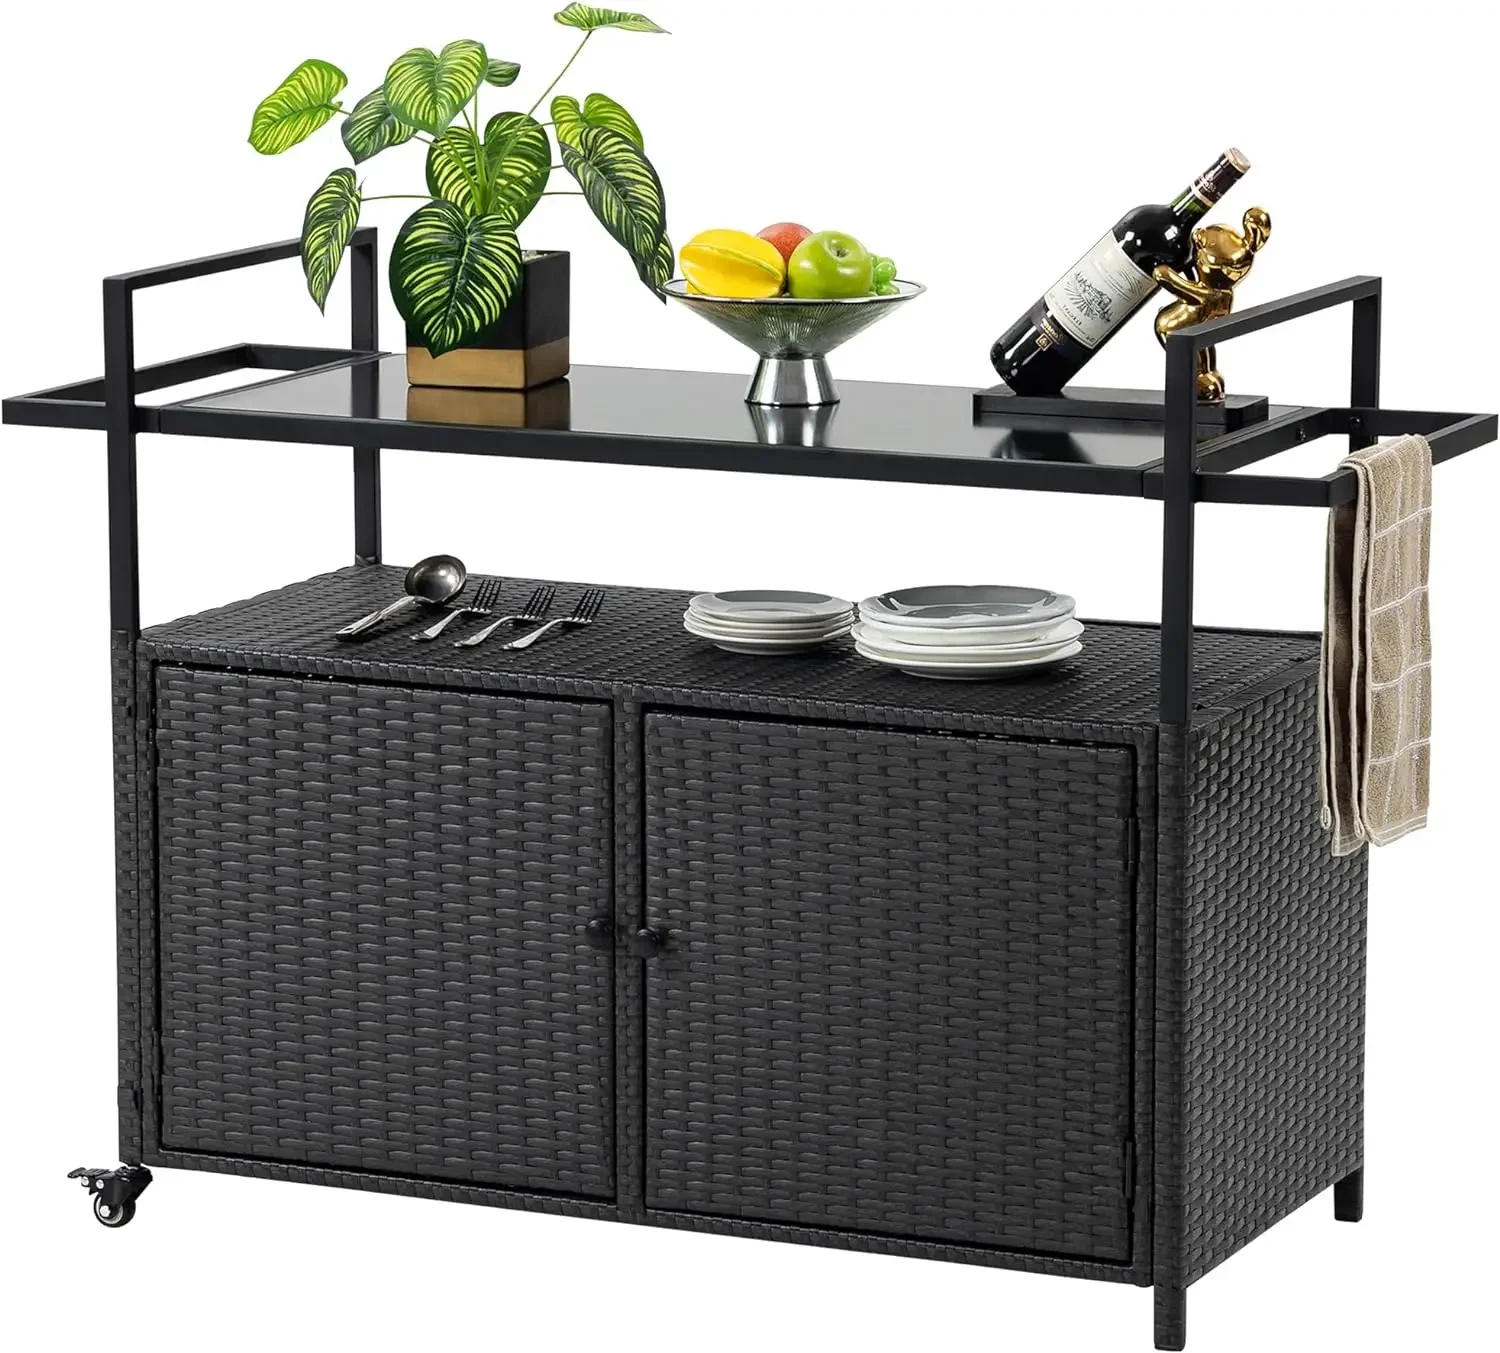 

Outdoor Bar Cart with Storage Cabinet - BBQ Grill Carts w/ Wheels - Waterproof Wicker Patio Bar Console Table for Kitchen Island